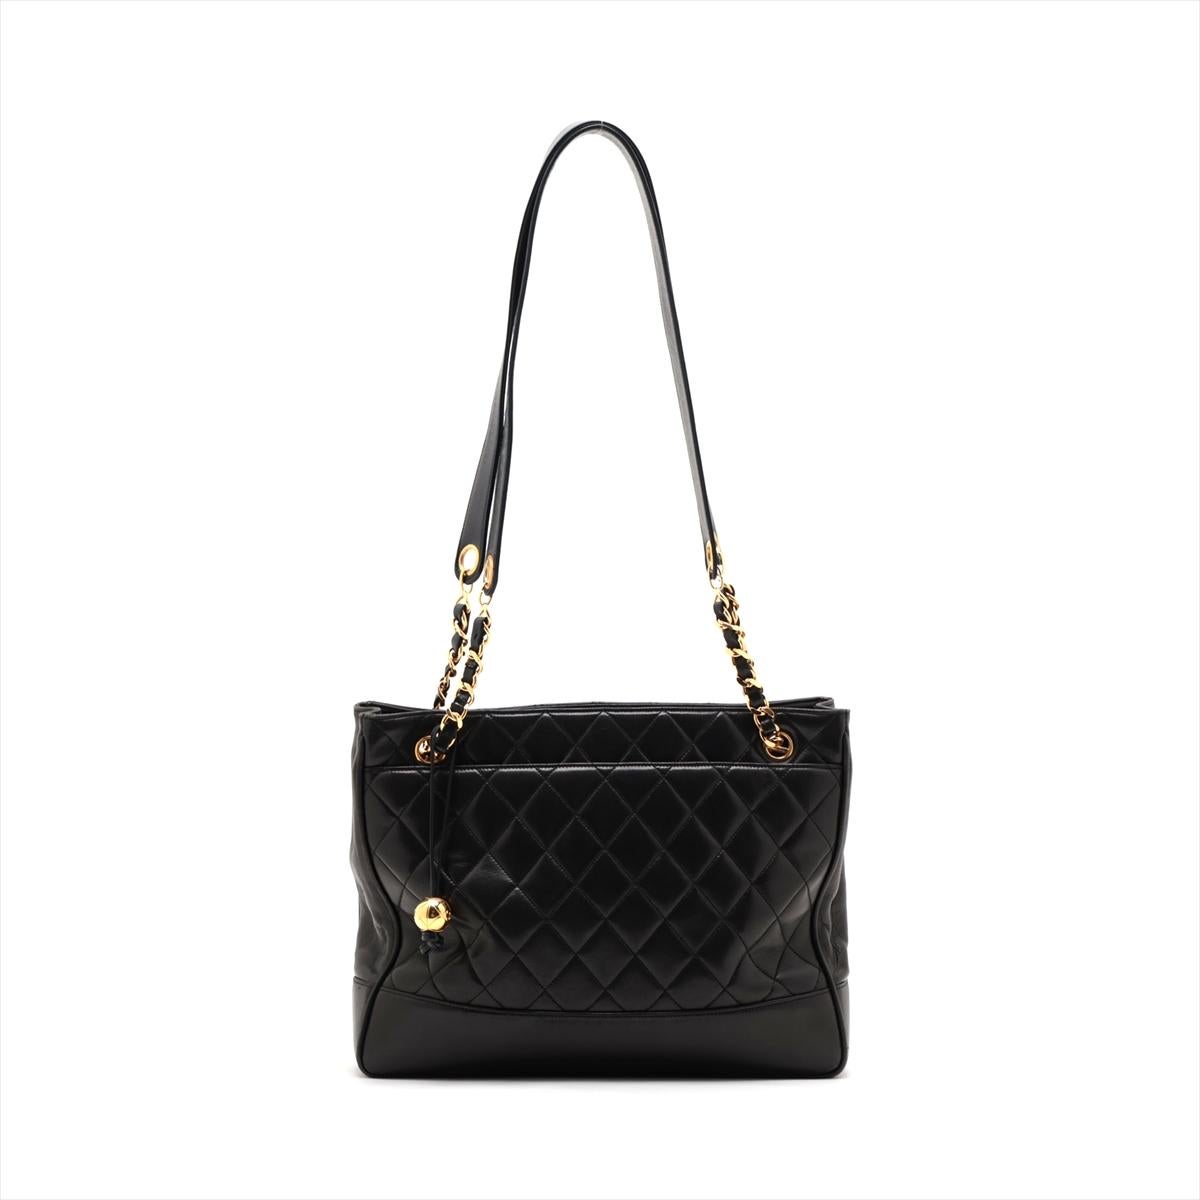 The Chanel Matelasse Lambskin Chain Tote Bag in Black embodies the essence of timeless elegance and sophistication. Crafted from luxurious lambskin leather, the tote features Chanel's iconic quilted pattern, adding a touch of texture and dimension